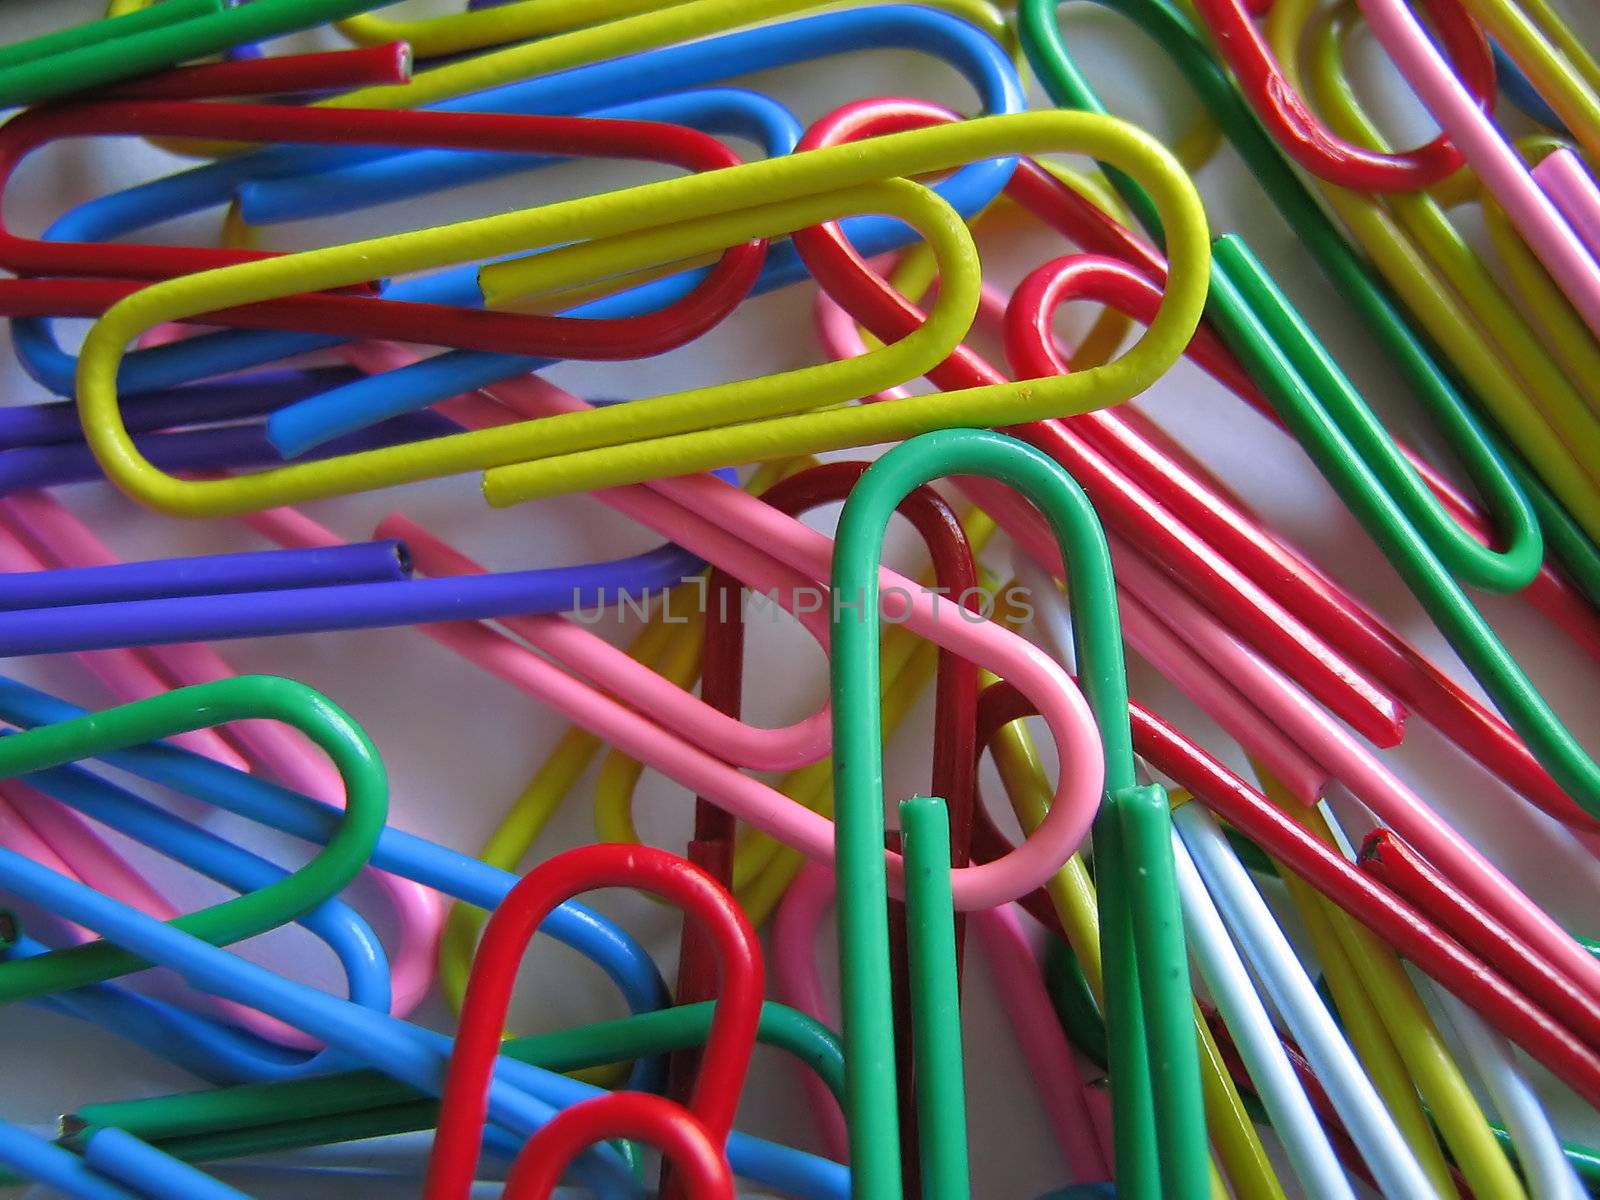 A photograph of plastic coated paper clips.